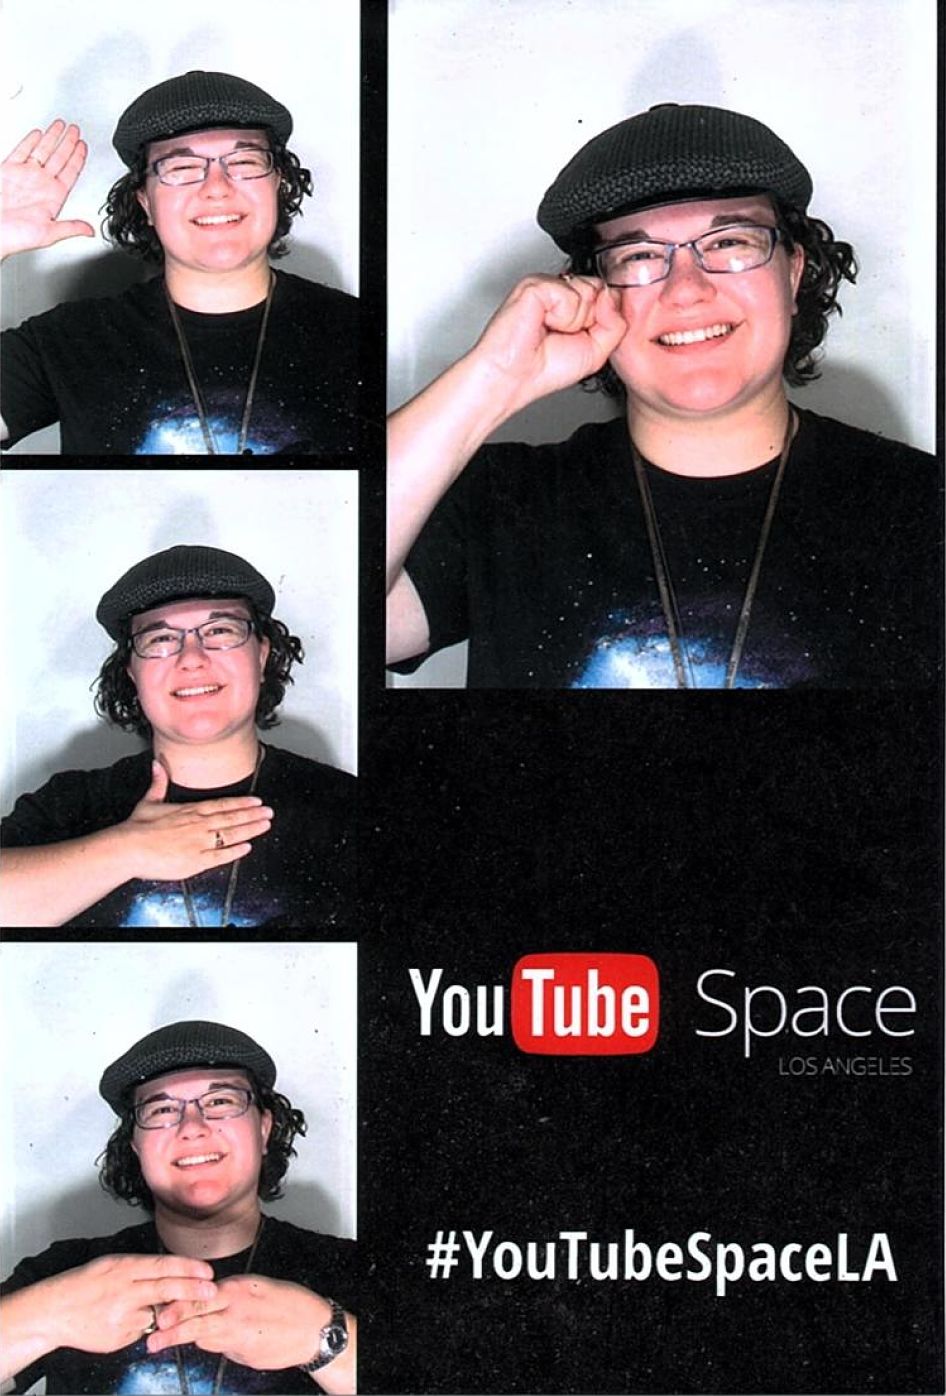 Shooting at YouTube Space LA